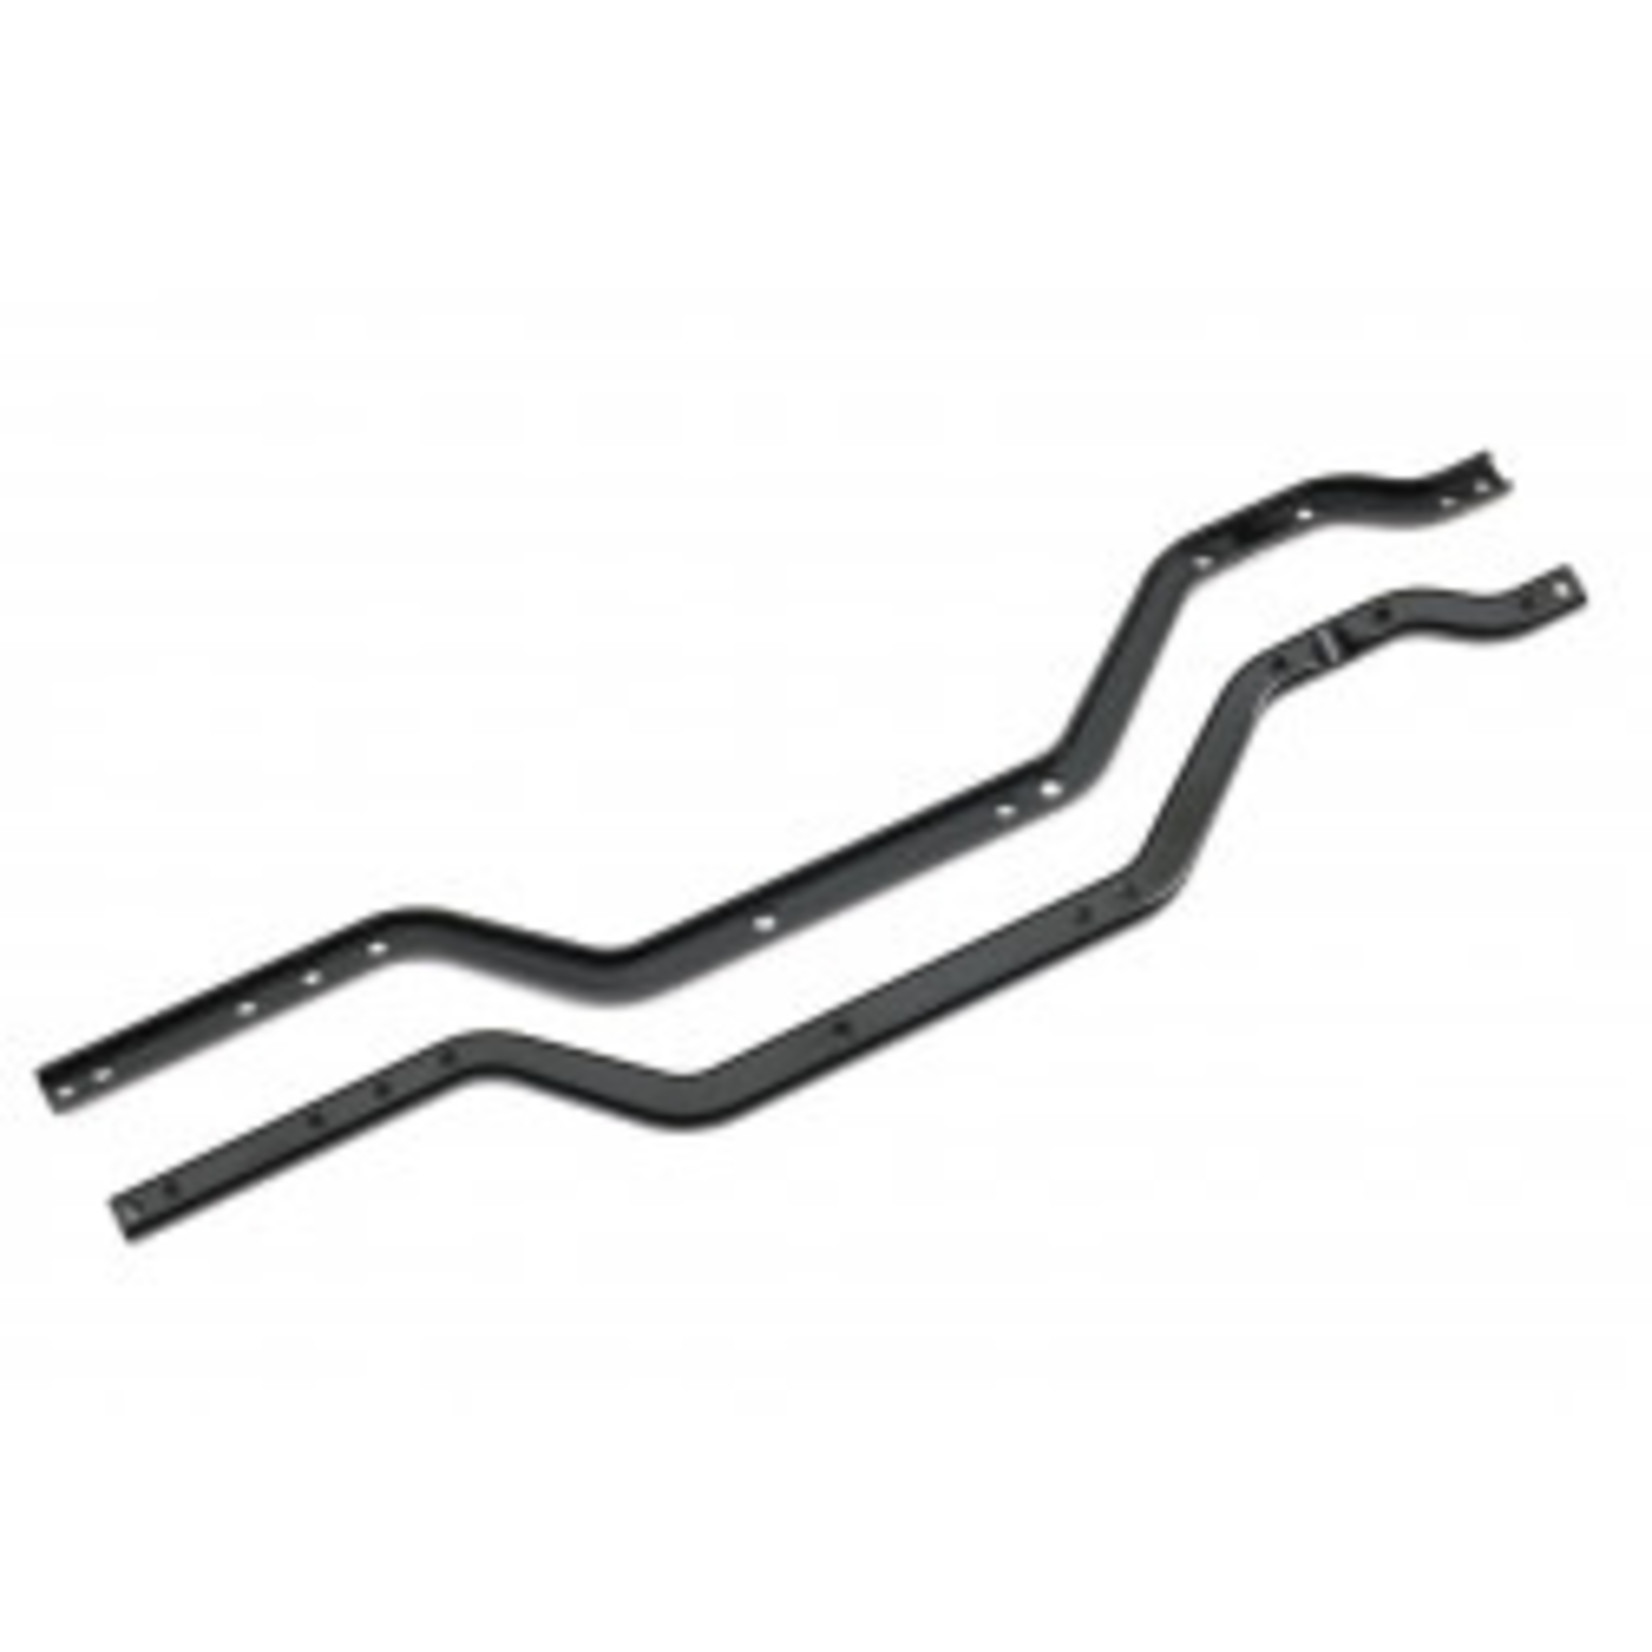 Traxxas TRX-4M Chassis rails, 202mm (steel) (left & right)